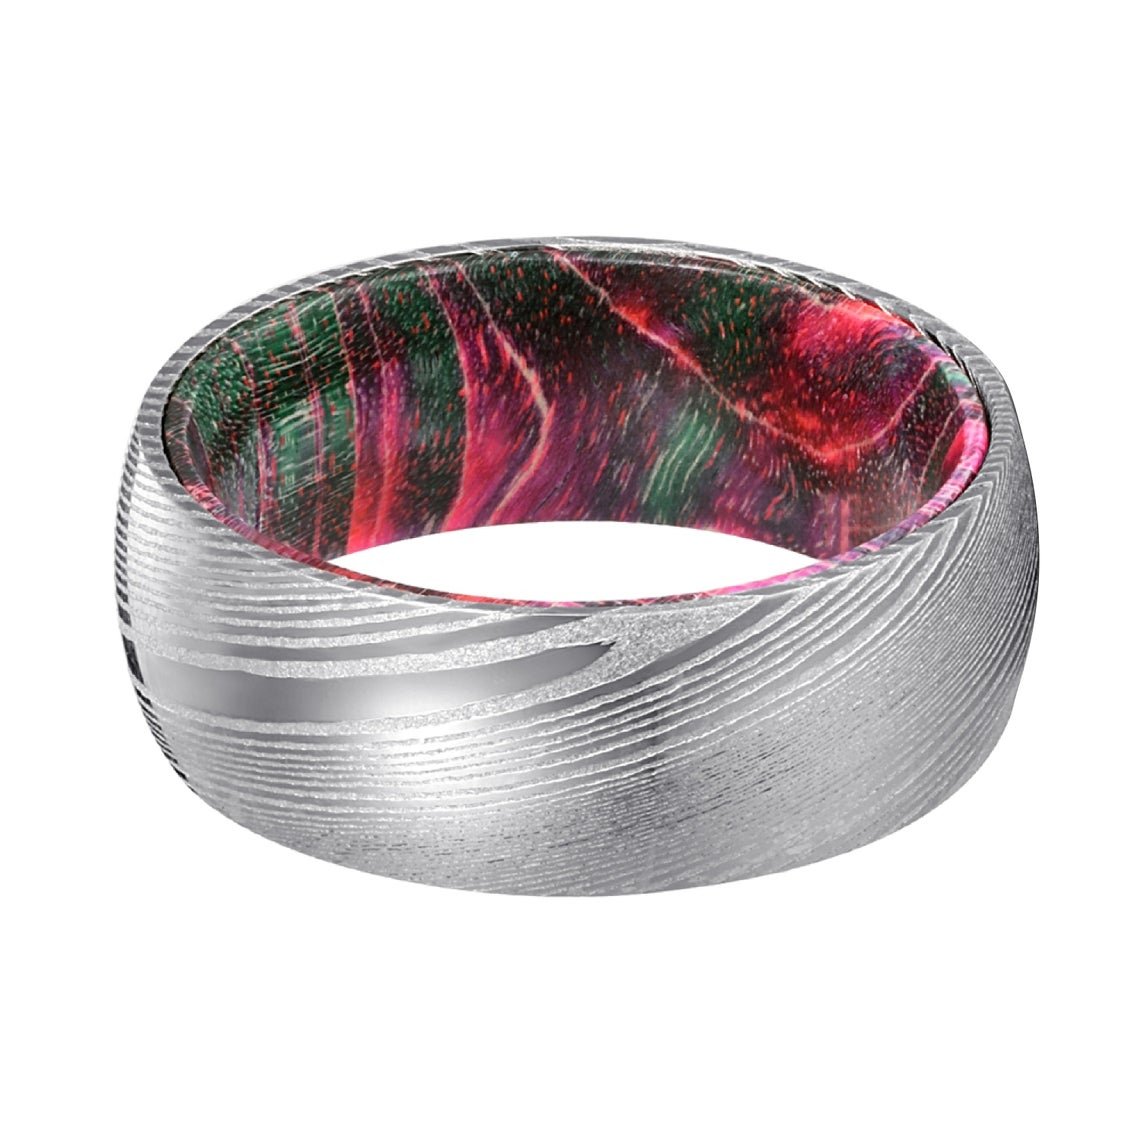 Xmas Steel - Damascus Steel with Green and Red Elder Wood Ring